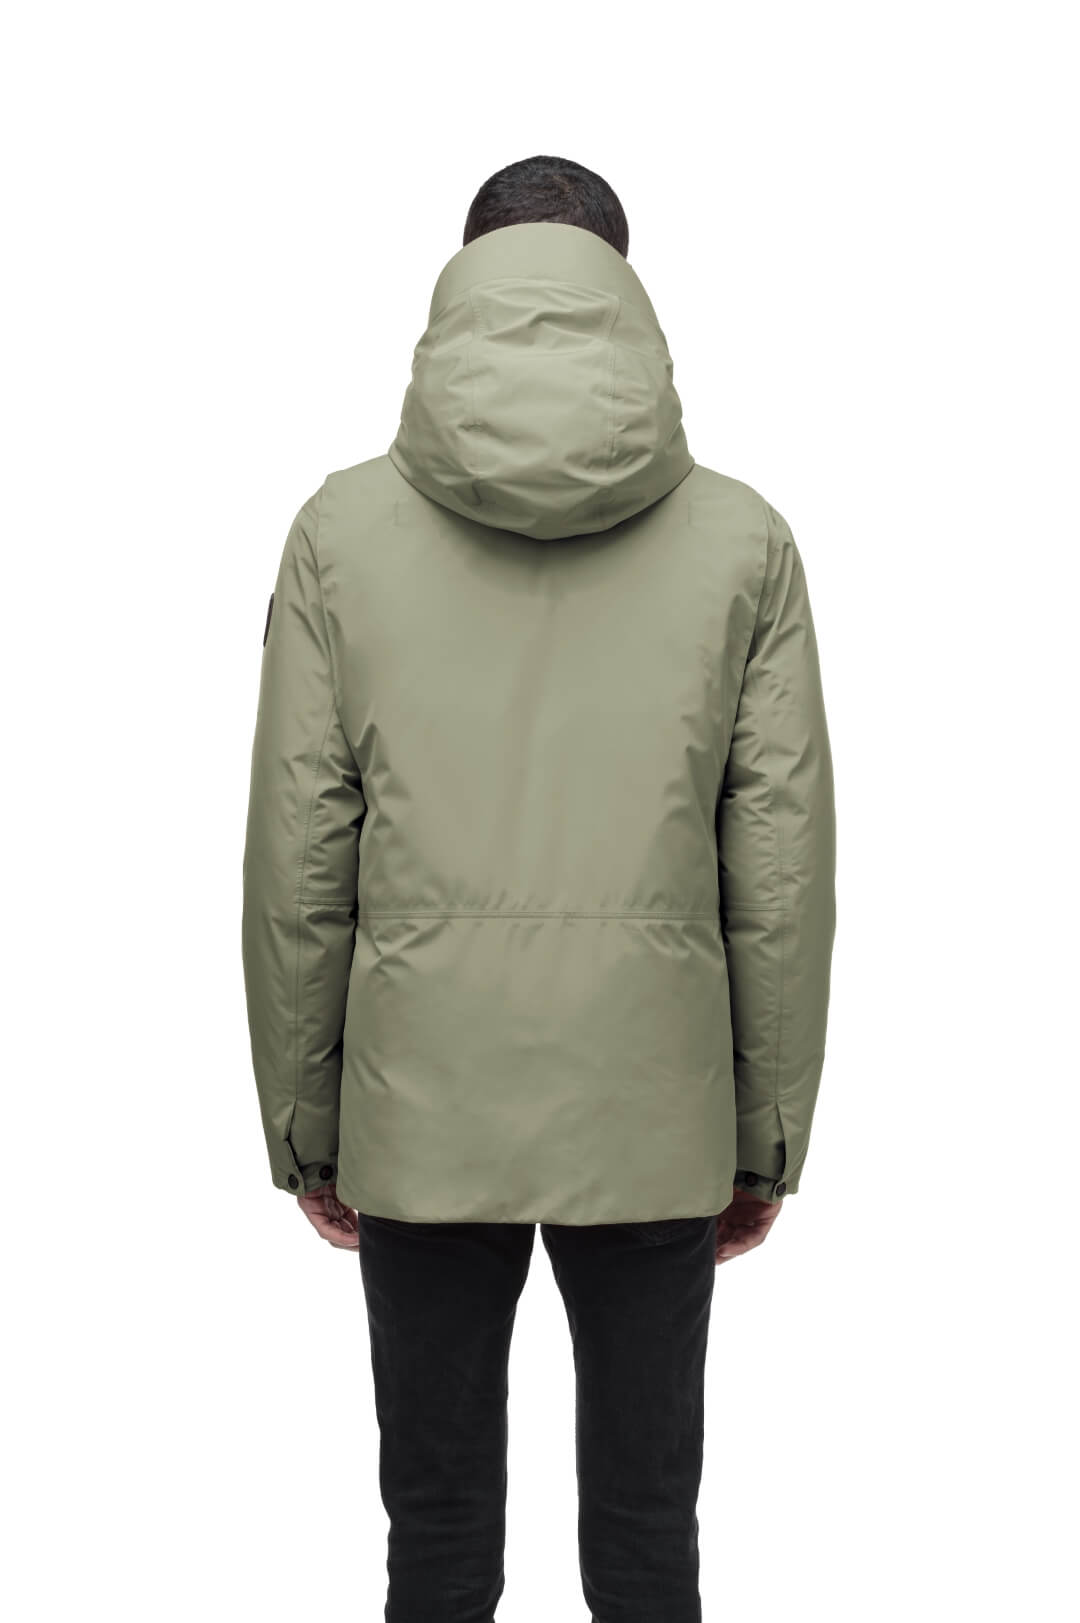 Geo Men's Short Parka in hip length, Canadian duck down insulation, non-removable hood, and two-way zipper, in Clover